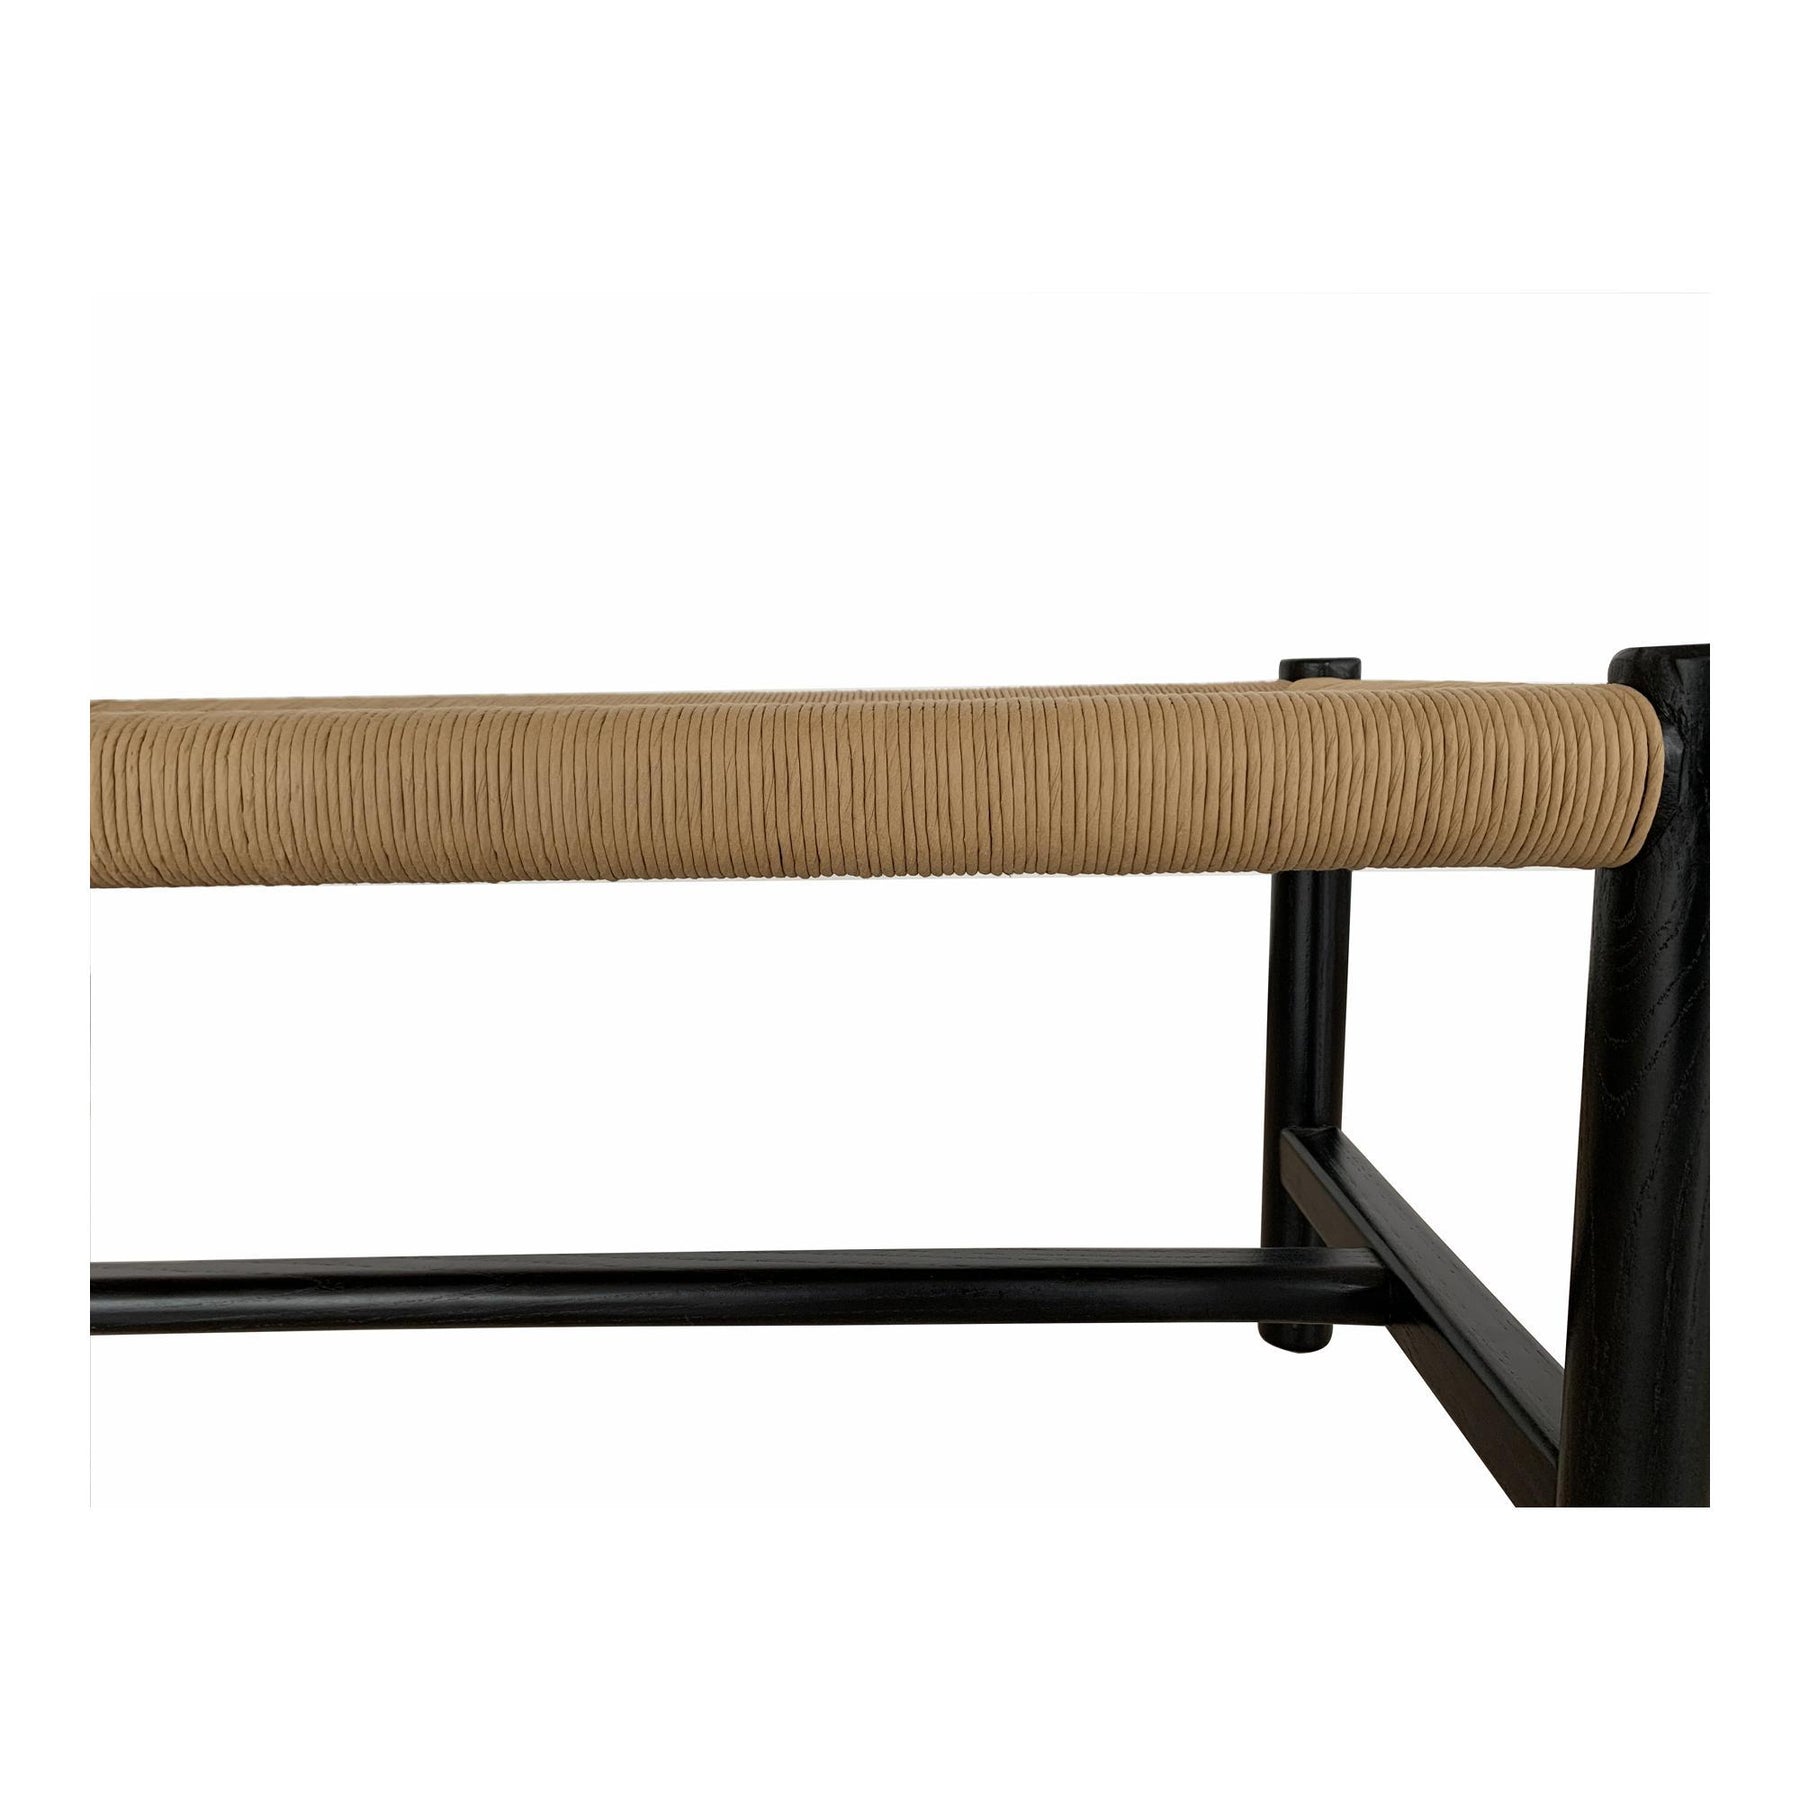 Moe's Home Collection Hawthorn Bench Large Black - FG-1028-02